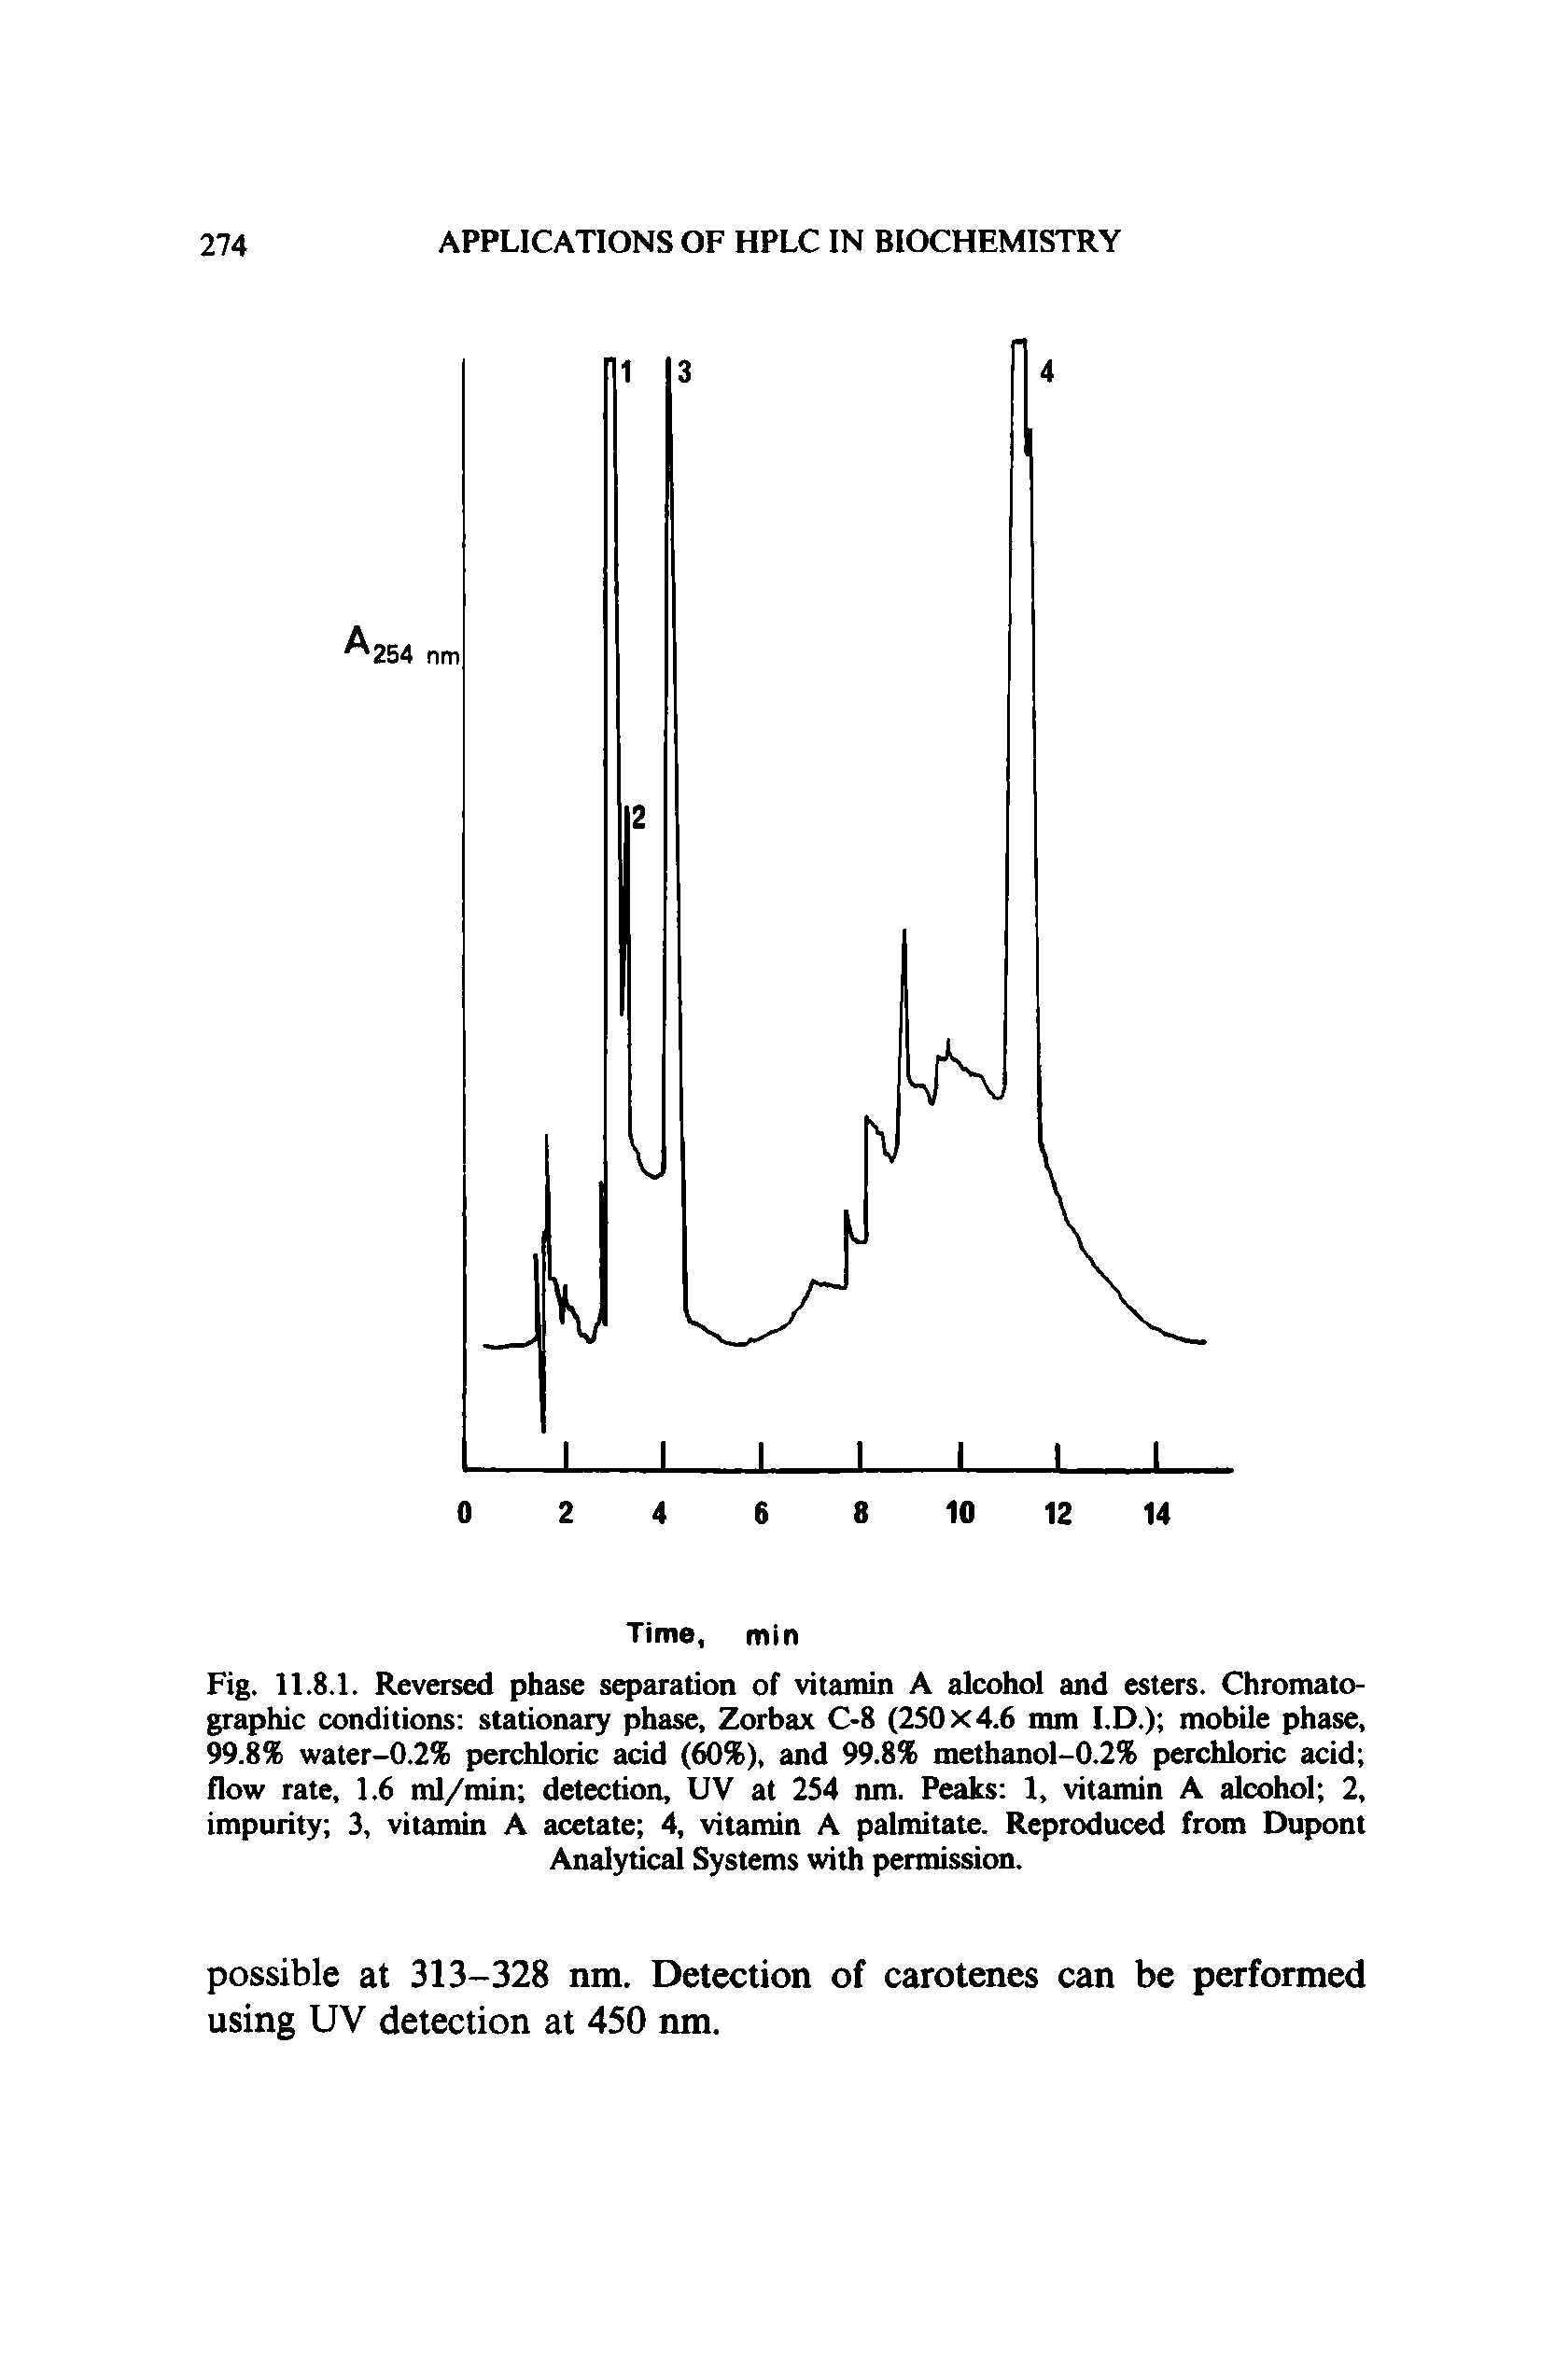 Fig. 11.8.1. Reversed phase separation of vitamin A alcohol and esters. Chromatographic conditions stationary phase, Zorbax C-8 (250 x 4.6 mm I.D.) mobile phase, 99.8% water-0.2% perchloric acid (60%), and 99.8% methanol-0.2% perchloric acid flow rate, 1.6 ml/min detection, UV at 254 nm. Peaks 1, vitamin A alcohol 2, impurity 3, vitamin A acetate 4, vitamin A palmitate. Reproduced from Dupont Analytical Systems with permission.